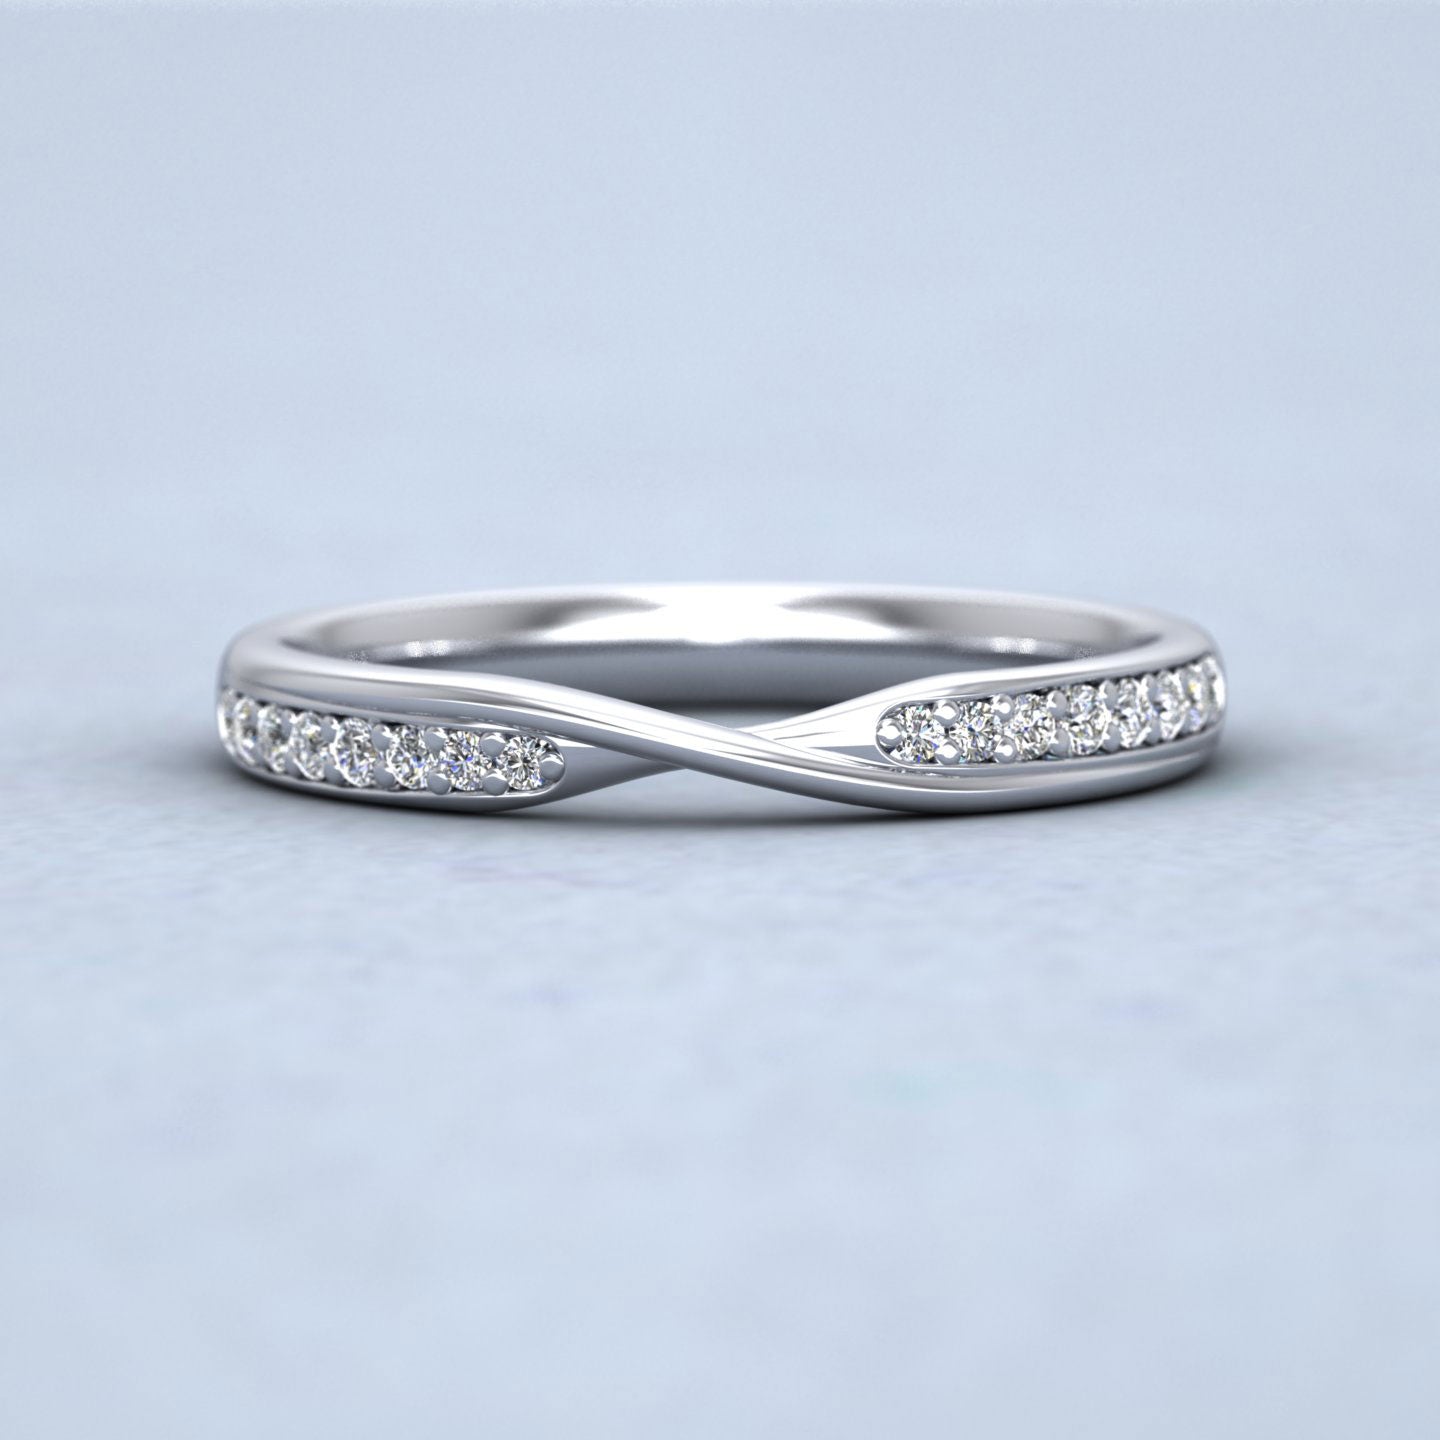 Crossover Pattern Wedding Ring In 9ct White Gold 2.5mm Wide With Sixteen Diamonds